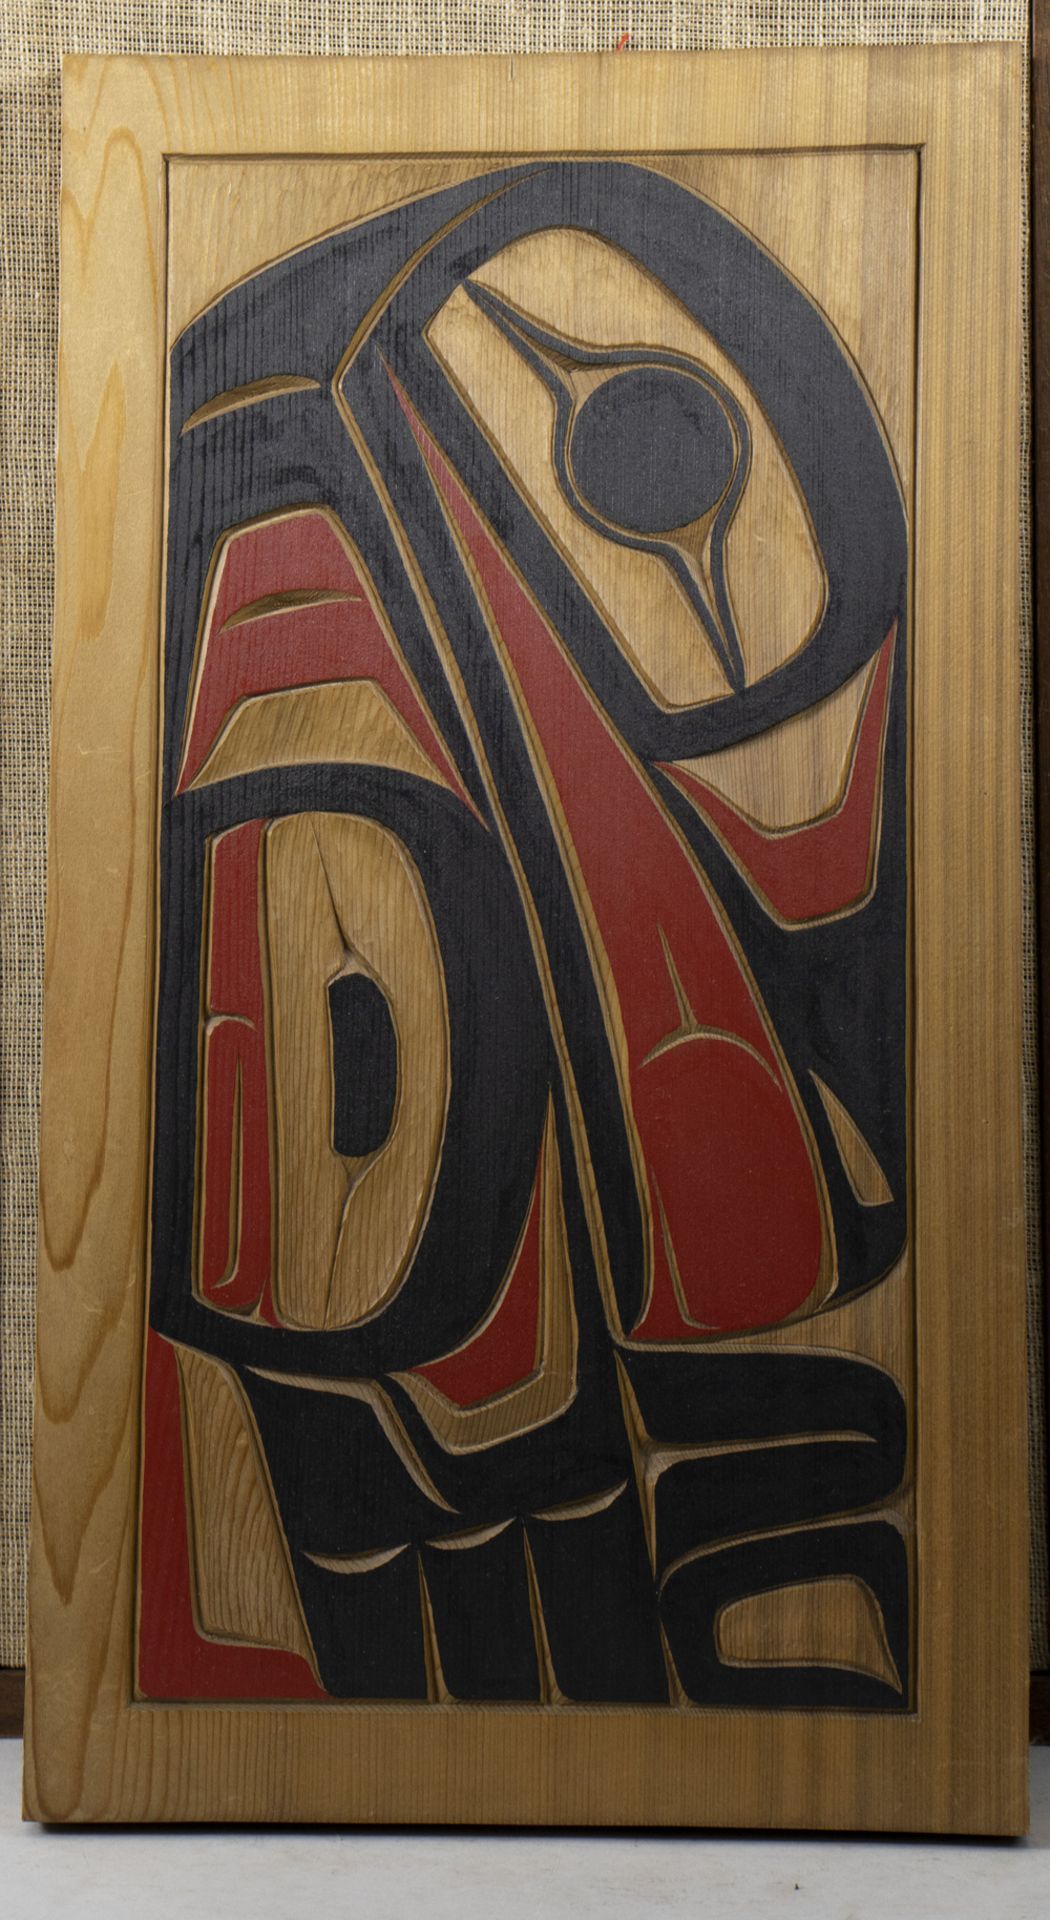 James ADAMS (20. Jh.), Holzrelief 'Rabe' / A wooden relief 'Raven', Canada, 1998